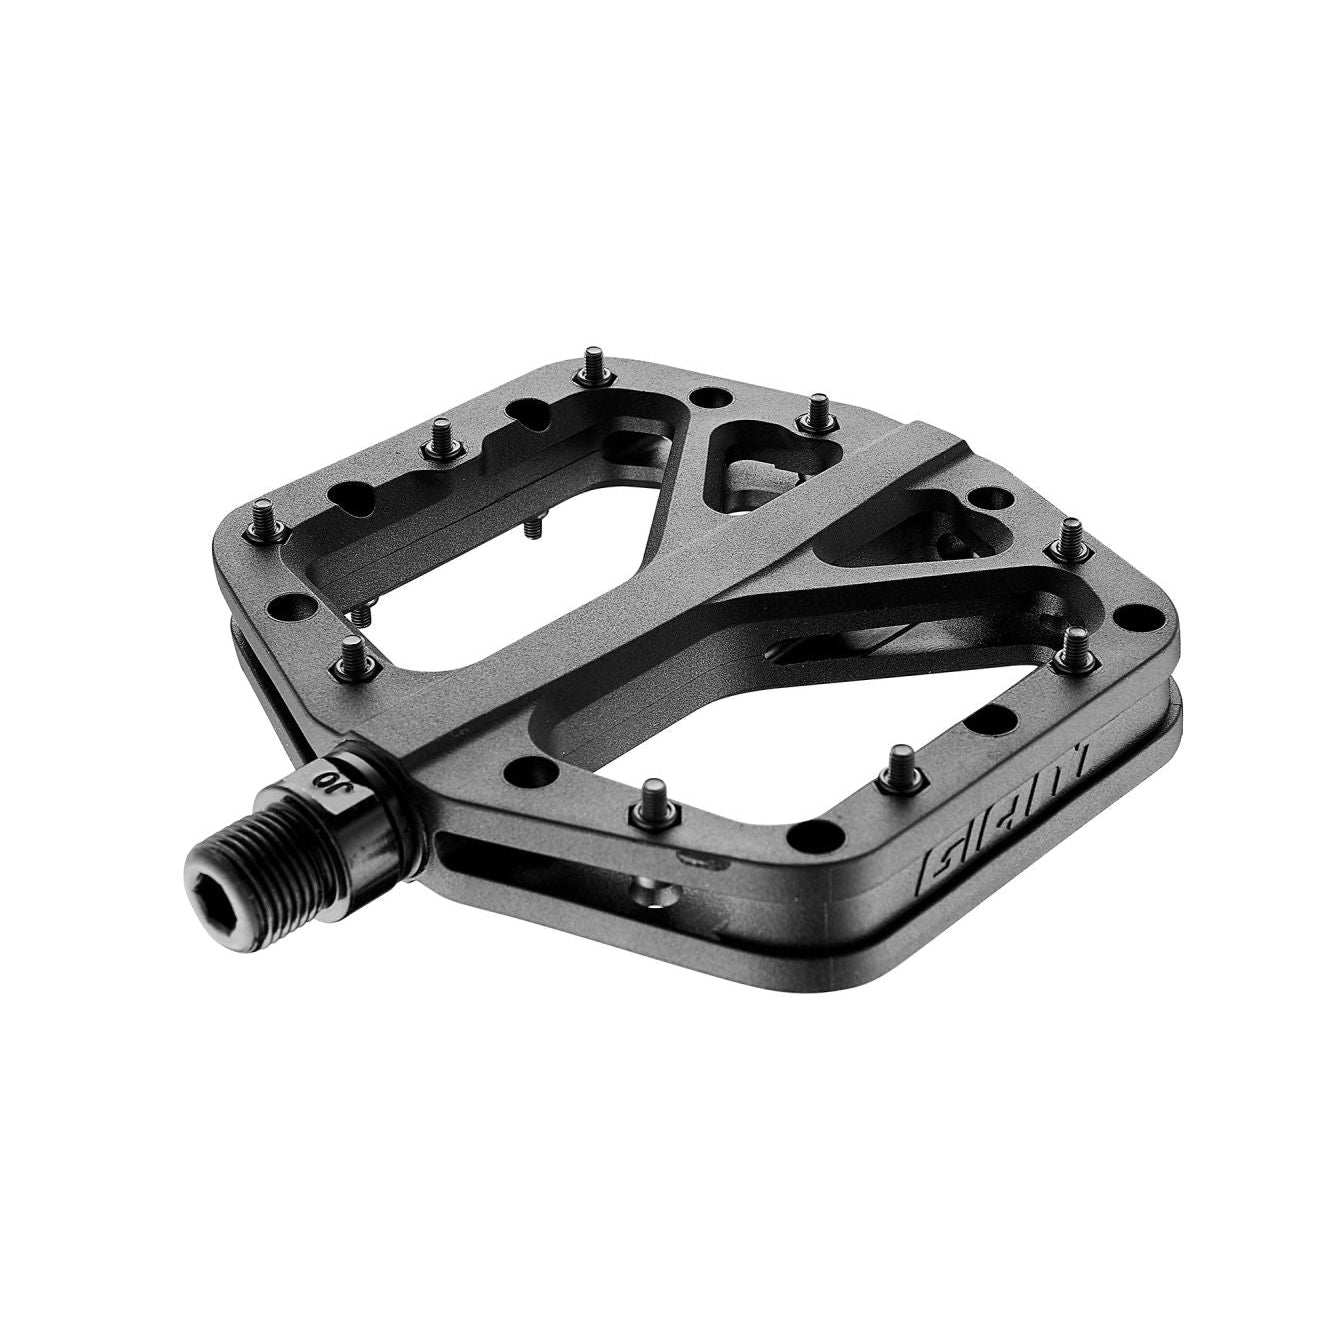 Giant Pinner Elite Flat Bike Pedals - Pedals - Bicycle Warehouse